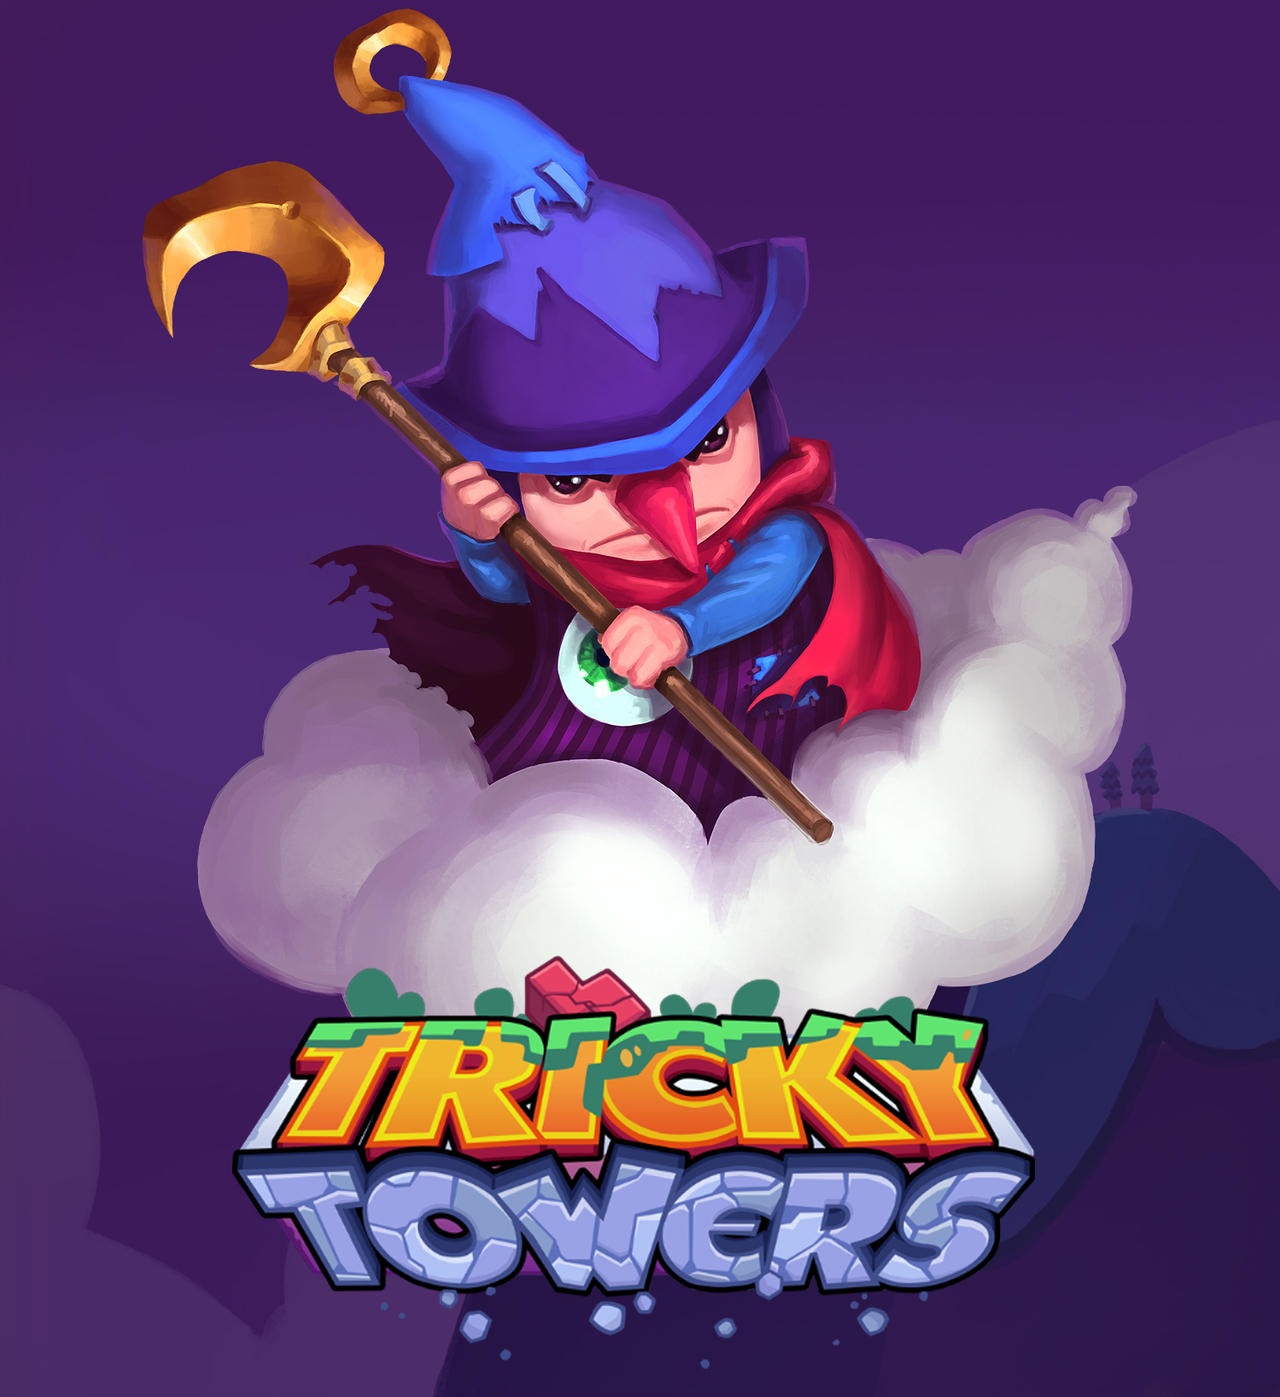 Tricky tower steam фото 45